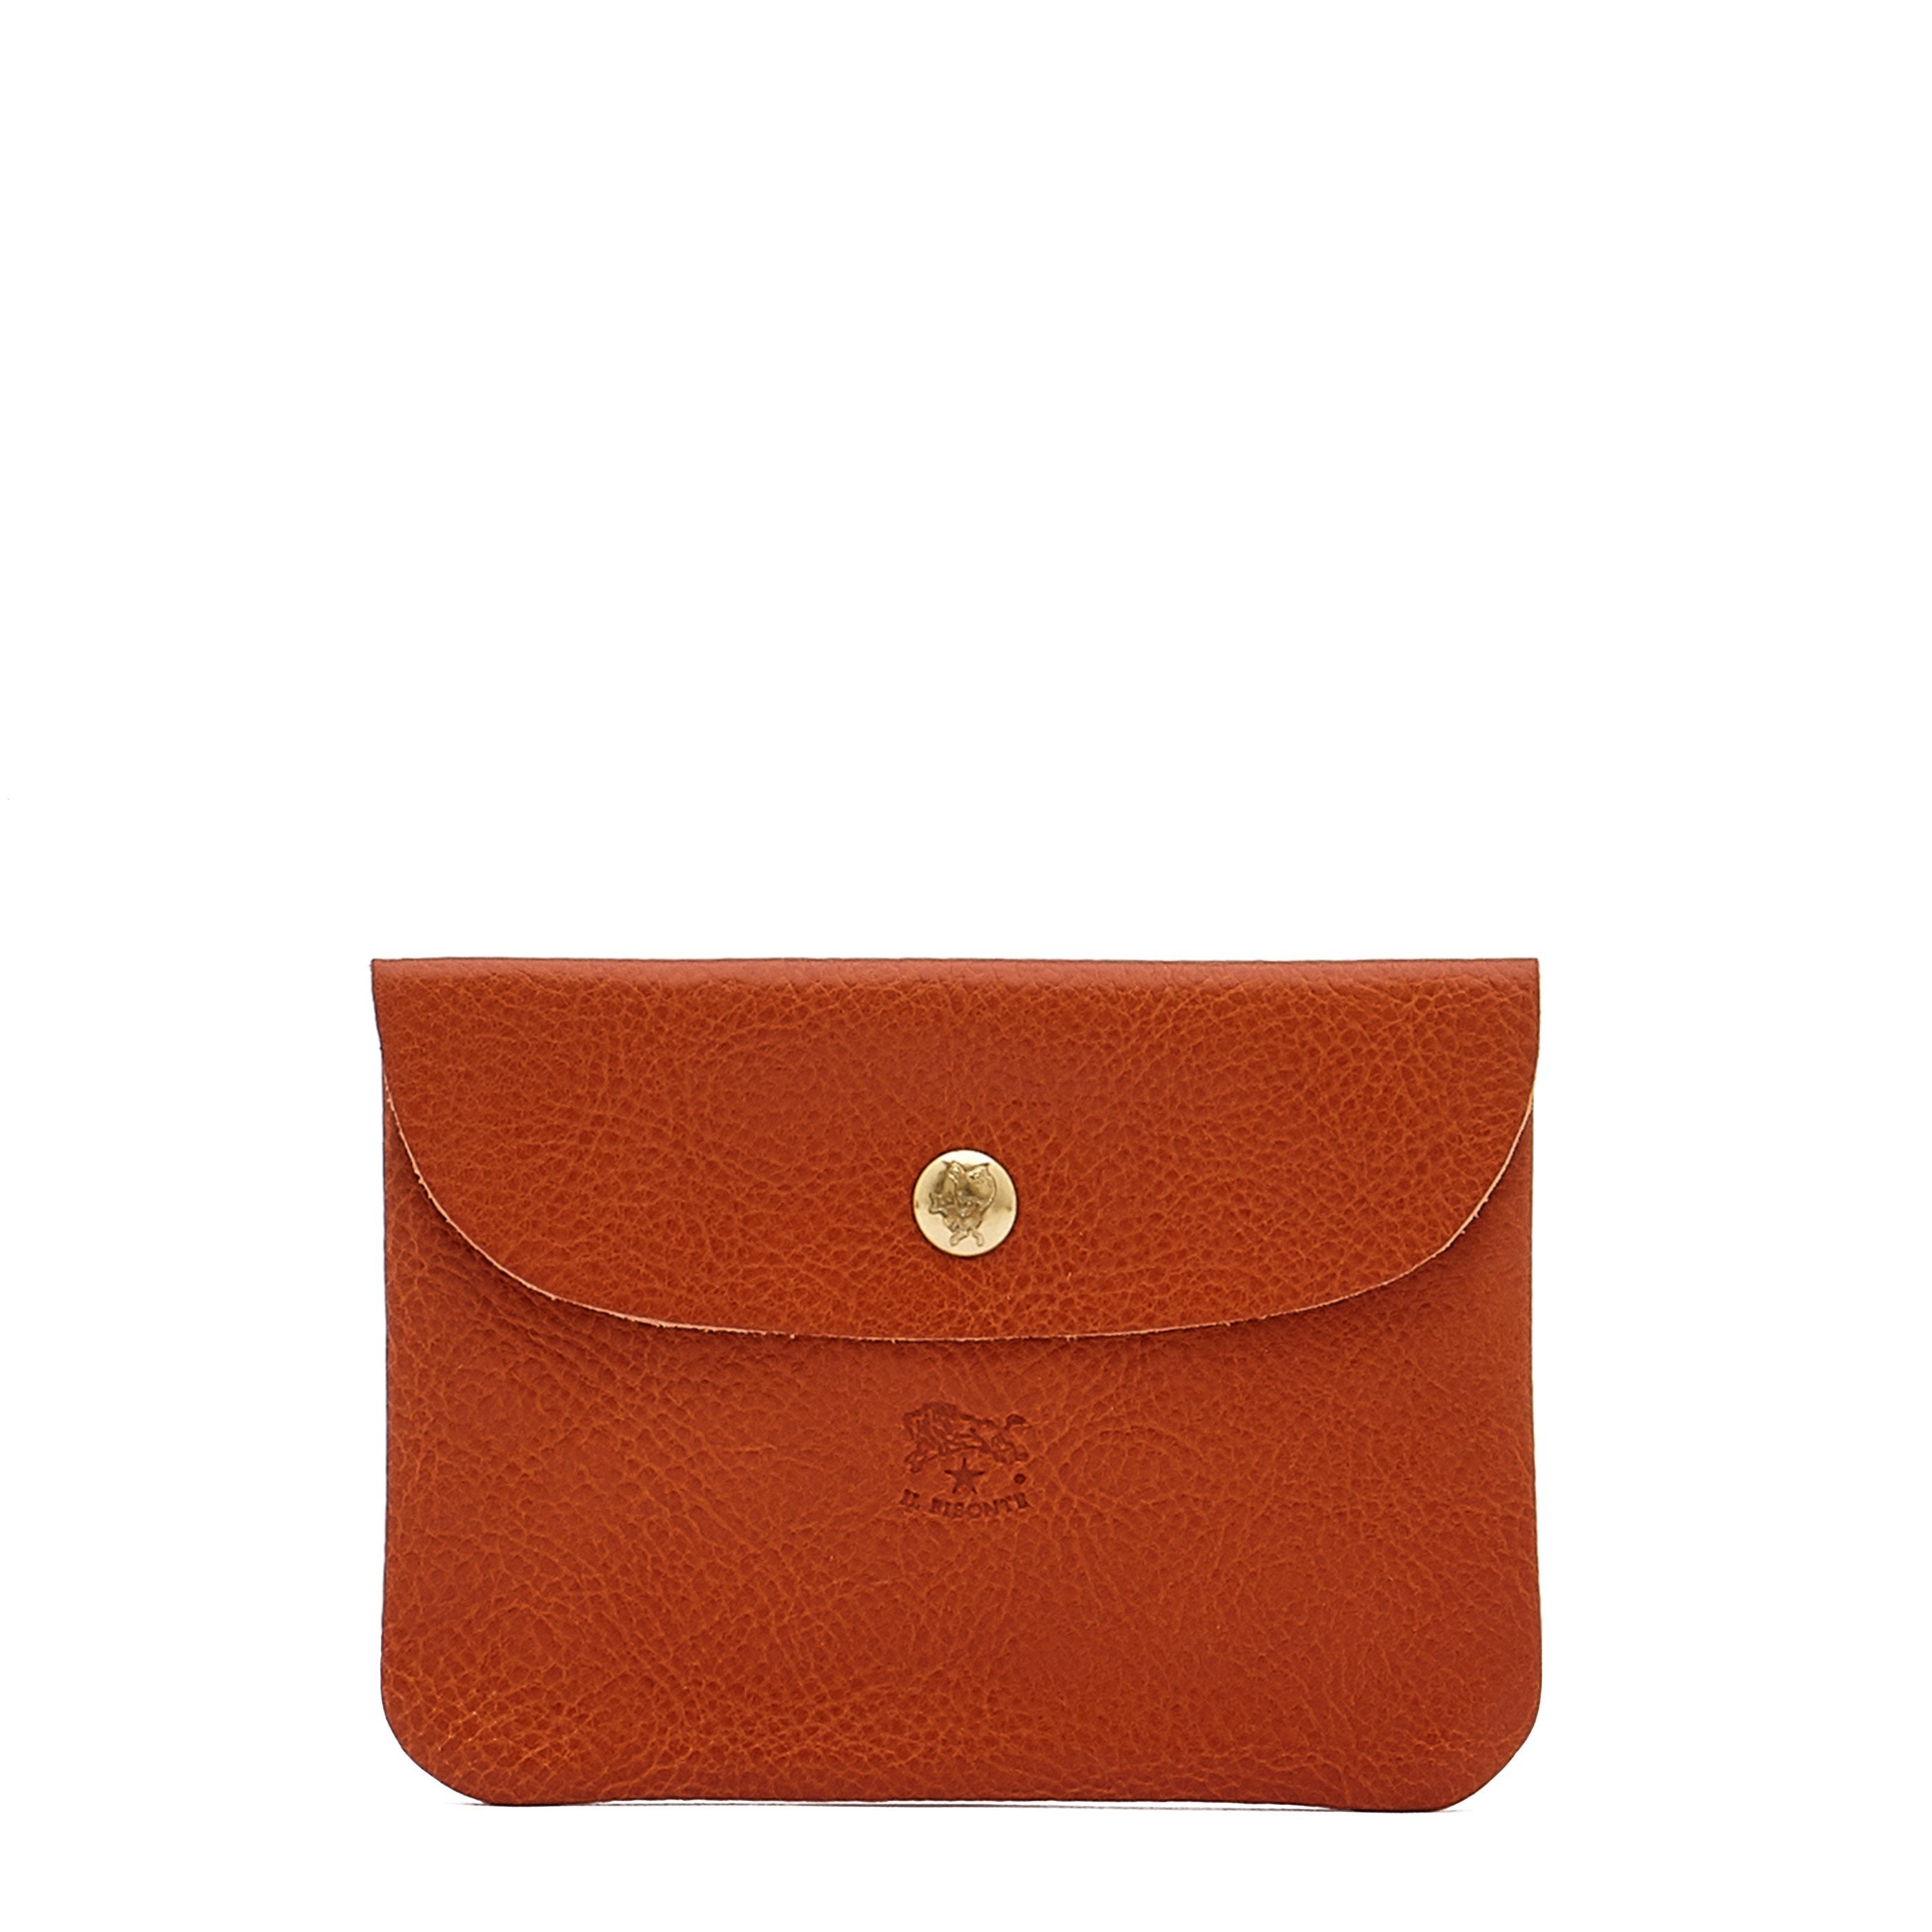 Case in leather color caramel